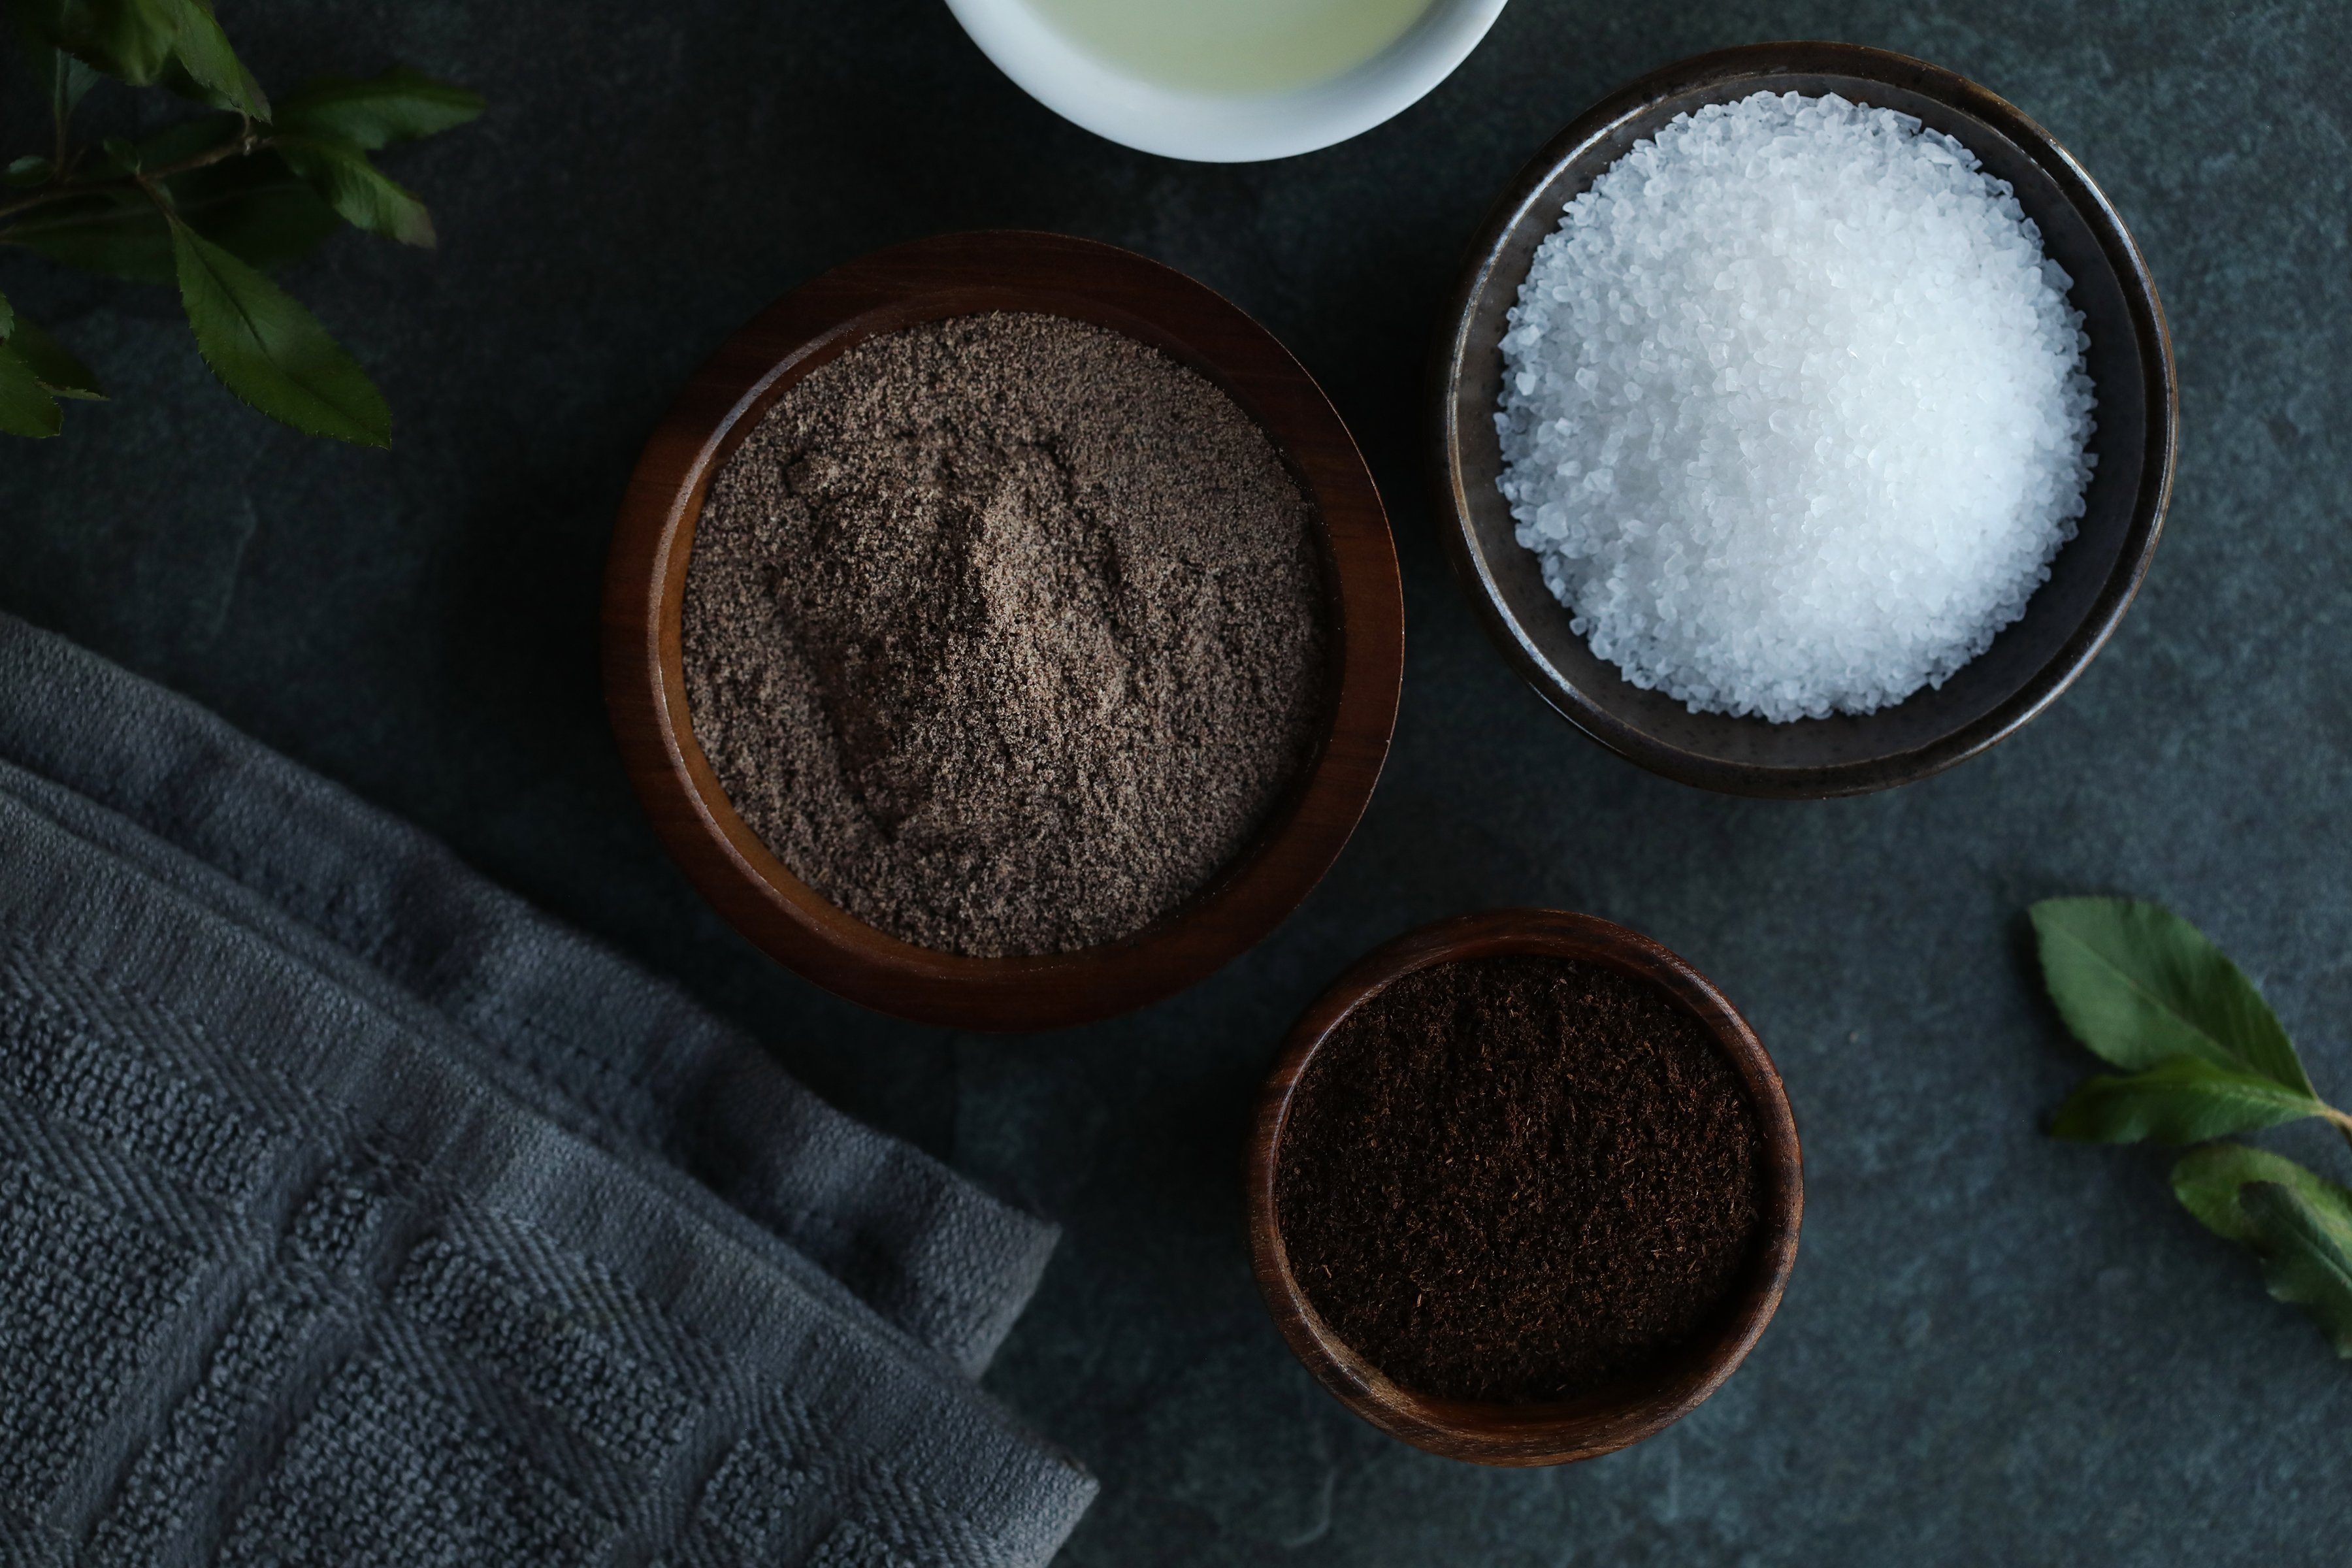 Ingredients are laid out for making a DIY body scrub. Ingredients include organic sweet almond oil, coarse sea salt, organic jojoba meal, and organic vanilla bean powder. 